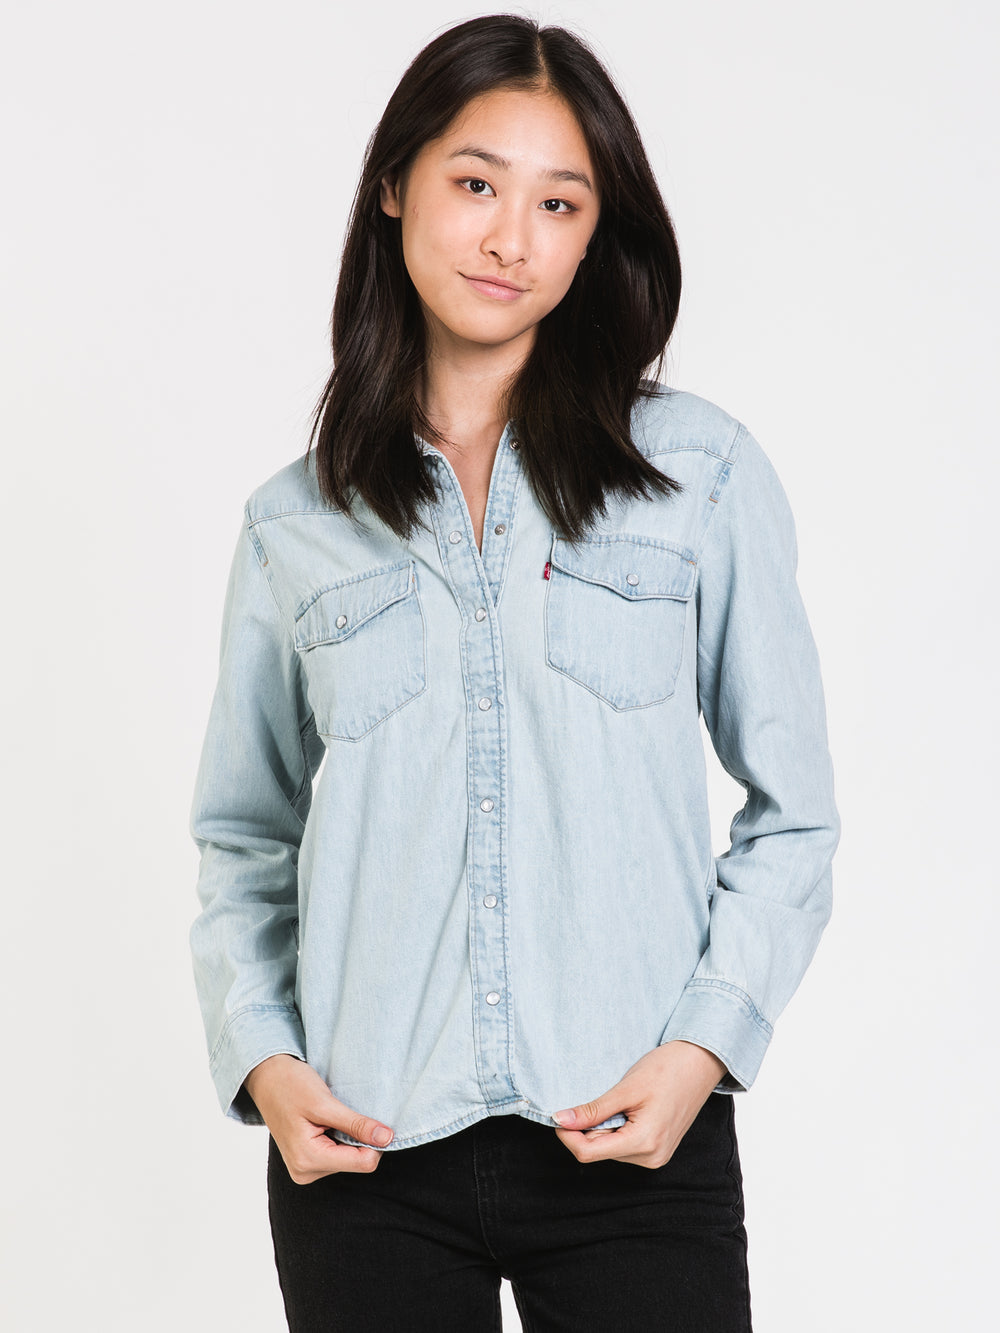 LEVIS ULTIMATE WESTERN BUTTON UP - CLEARANCE